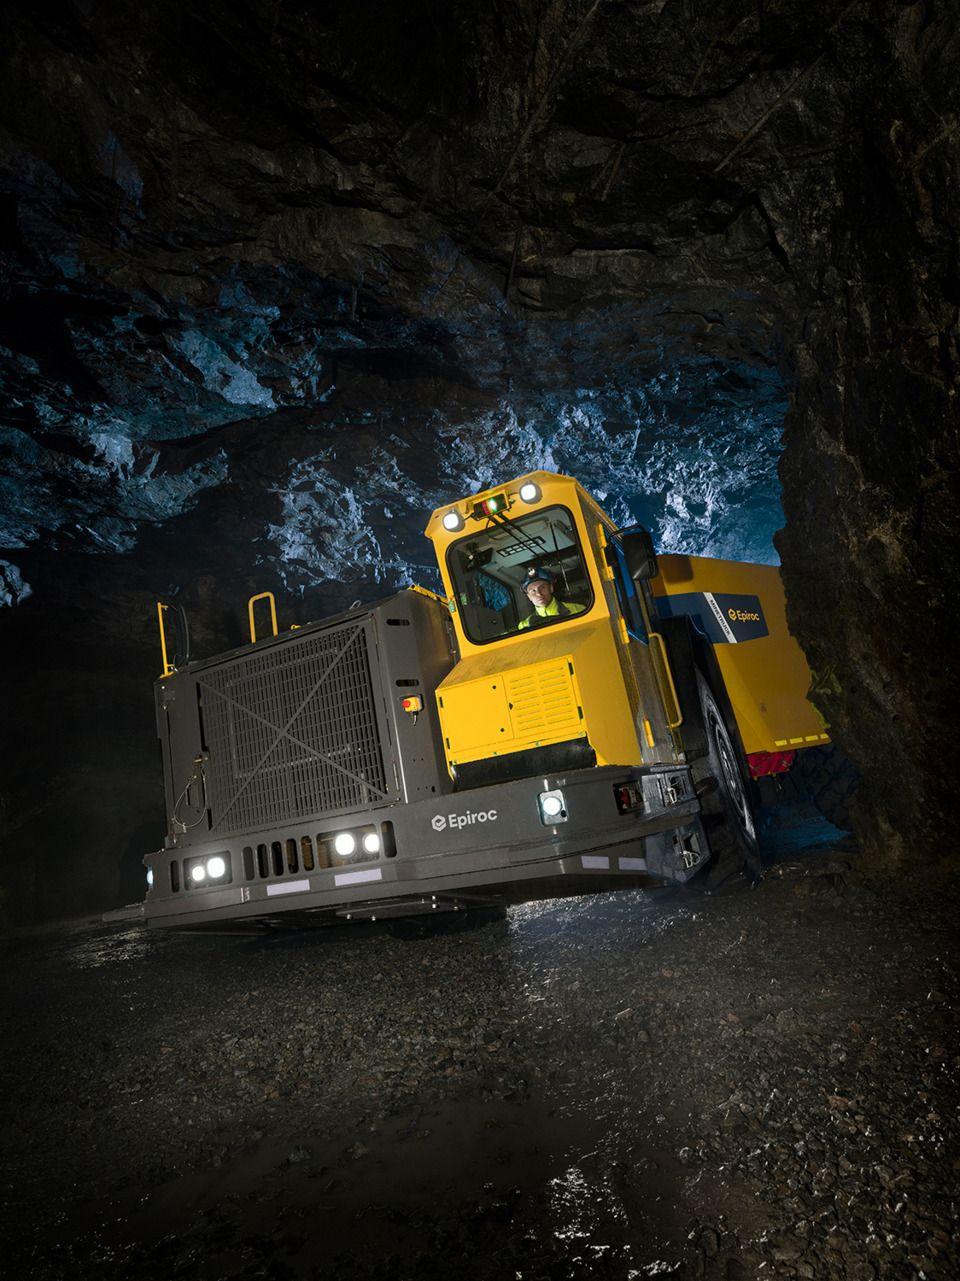 Epiroc Logo - Atlas Copco Wins Order from Pucobre to Strengthen Mining Productivity